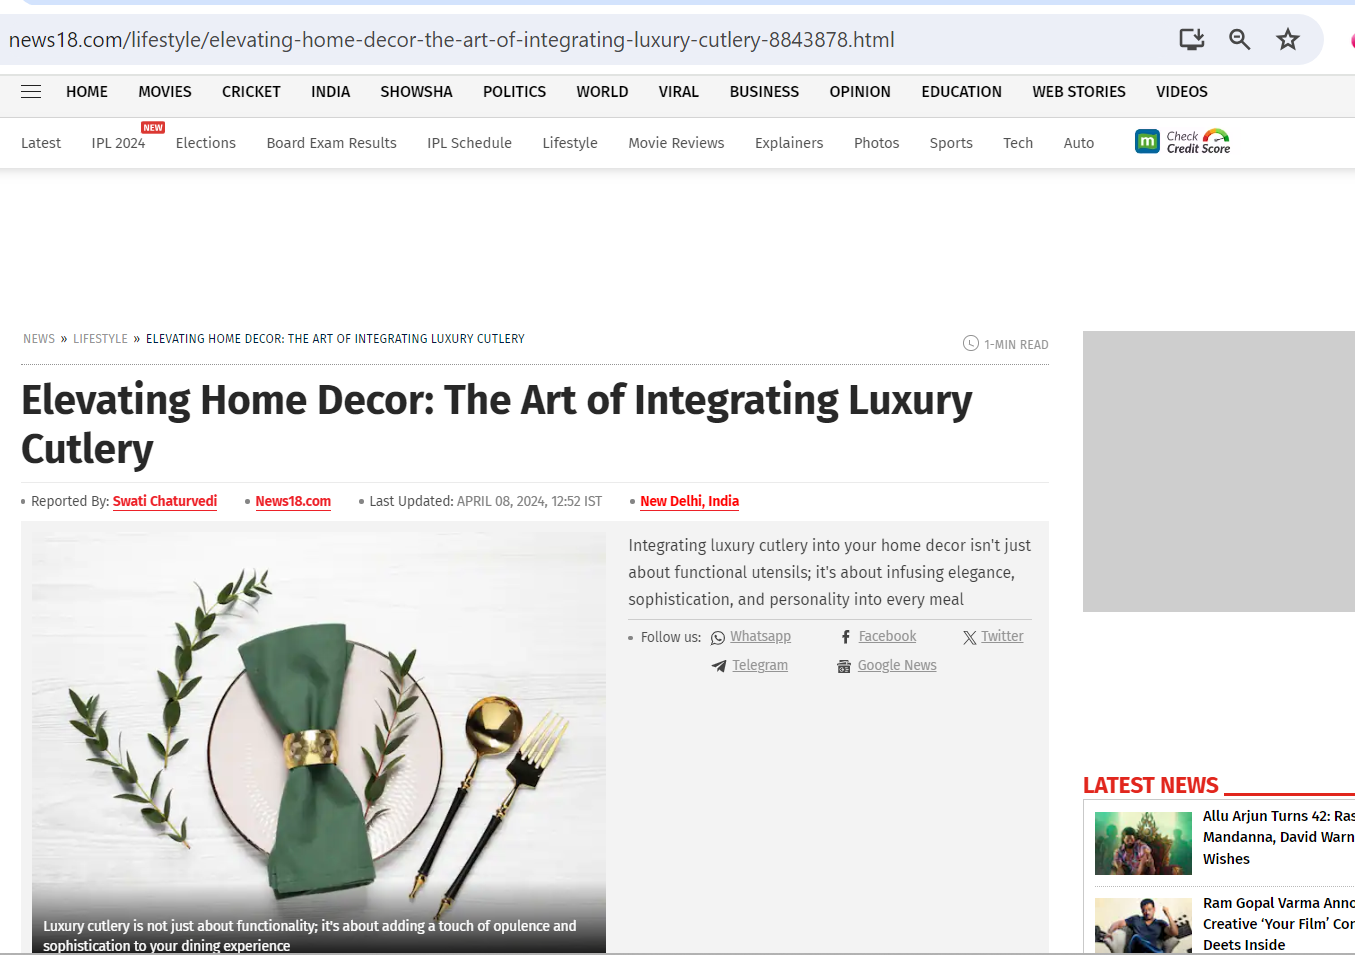 Elevating Home Decor: The Art of Integrating Luxury Cutlery